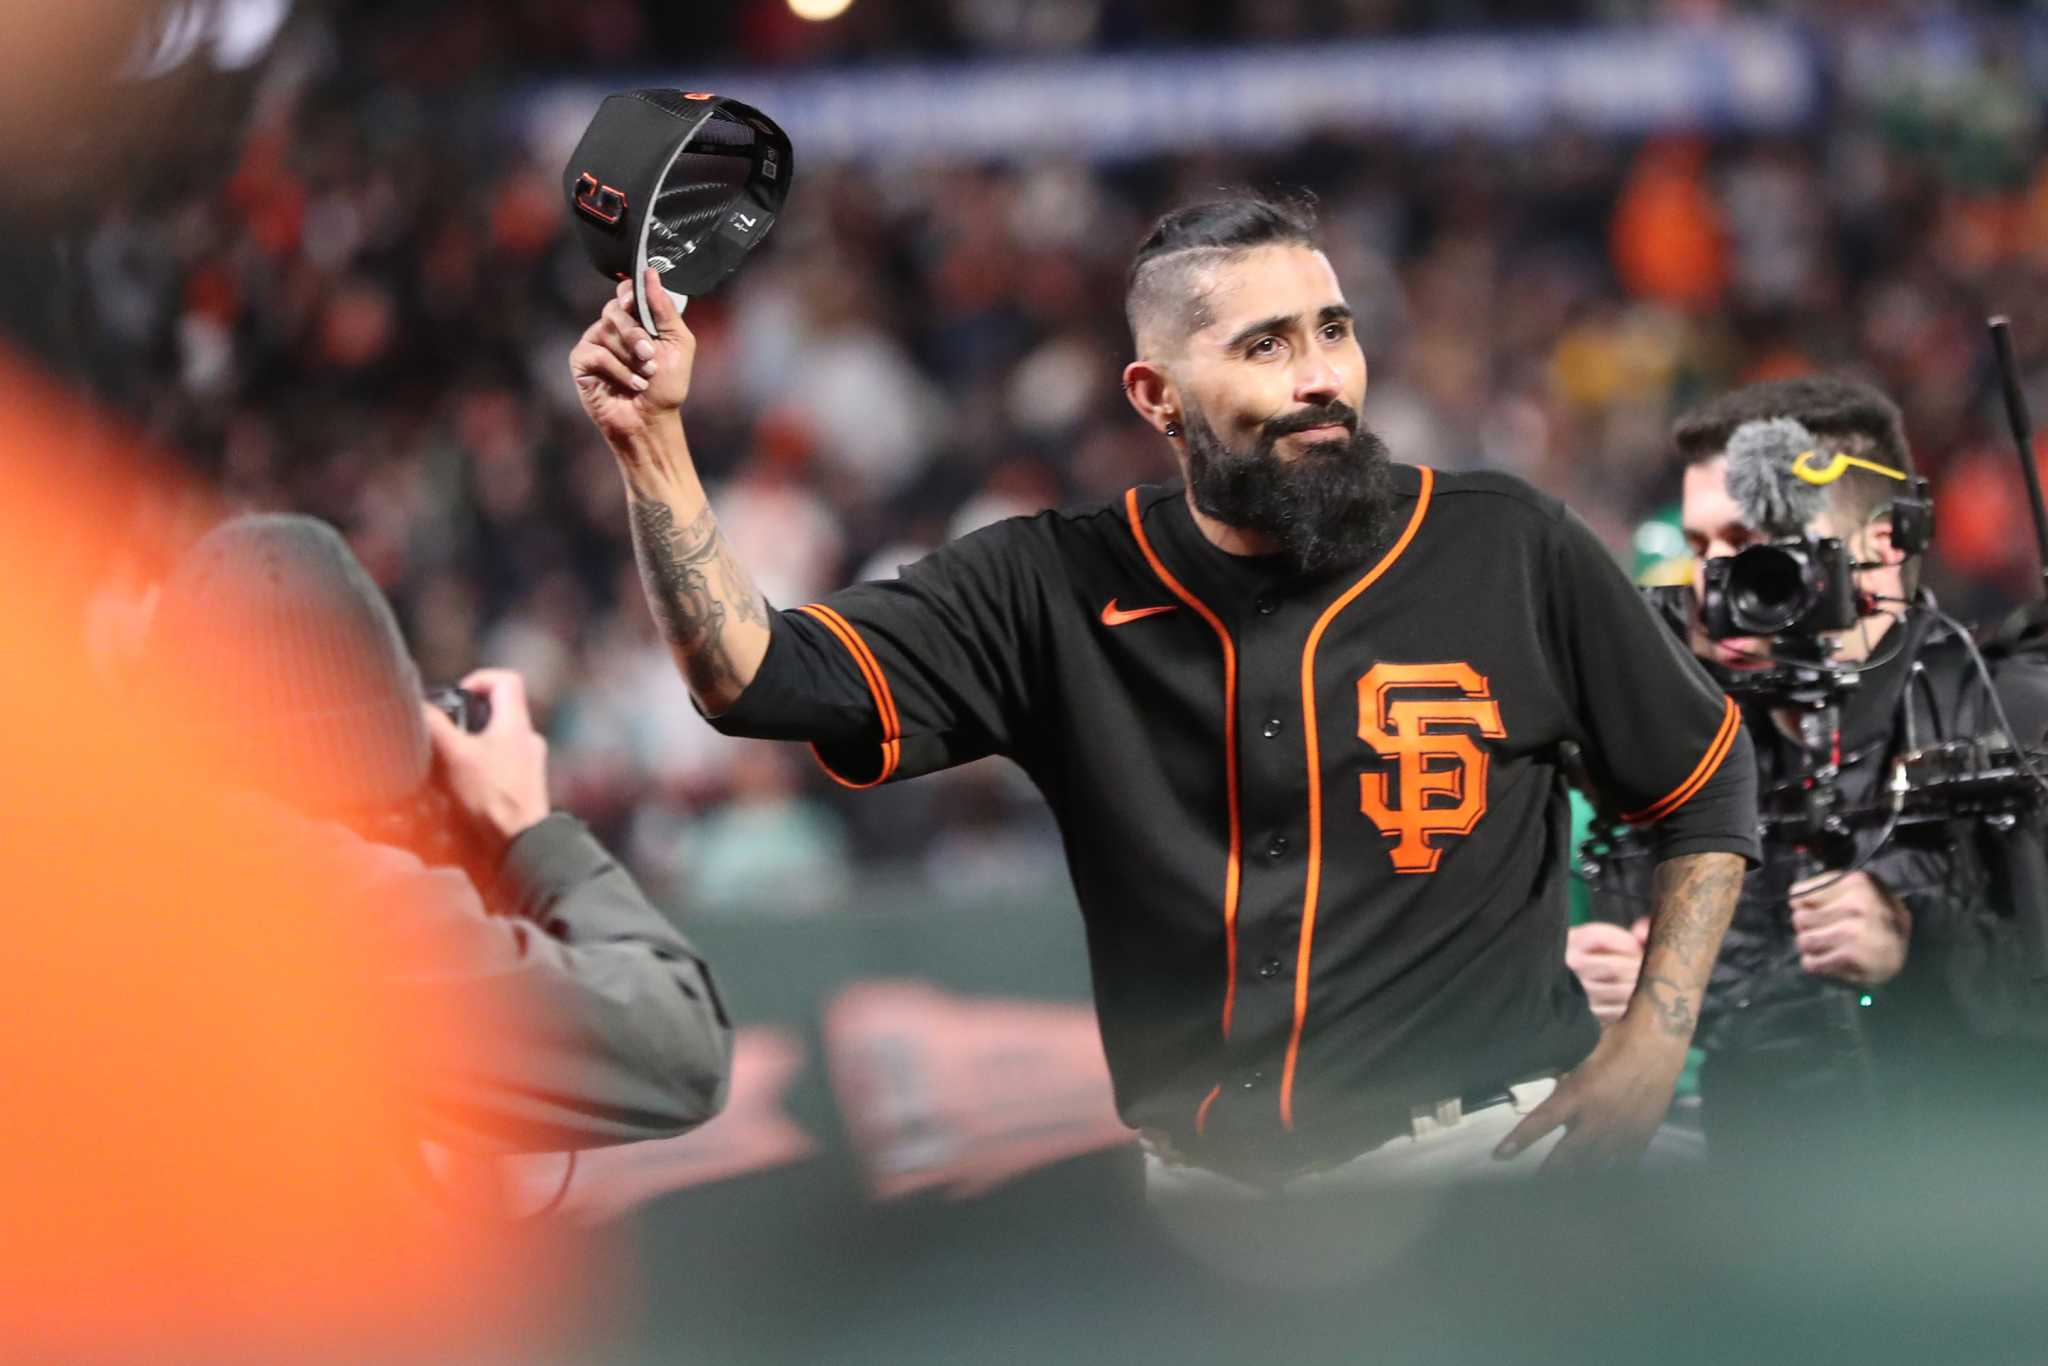 Ex-Giants reliever Sergio Romo has 'pretty awesome feeling' about joining  A's